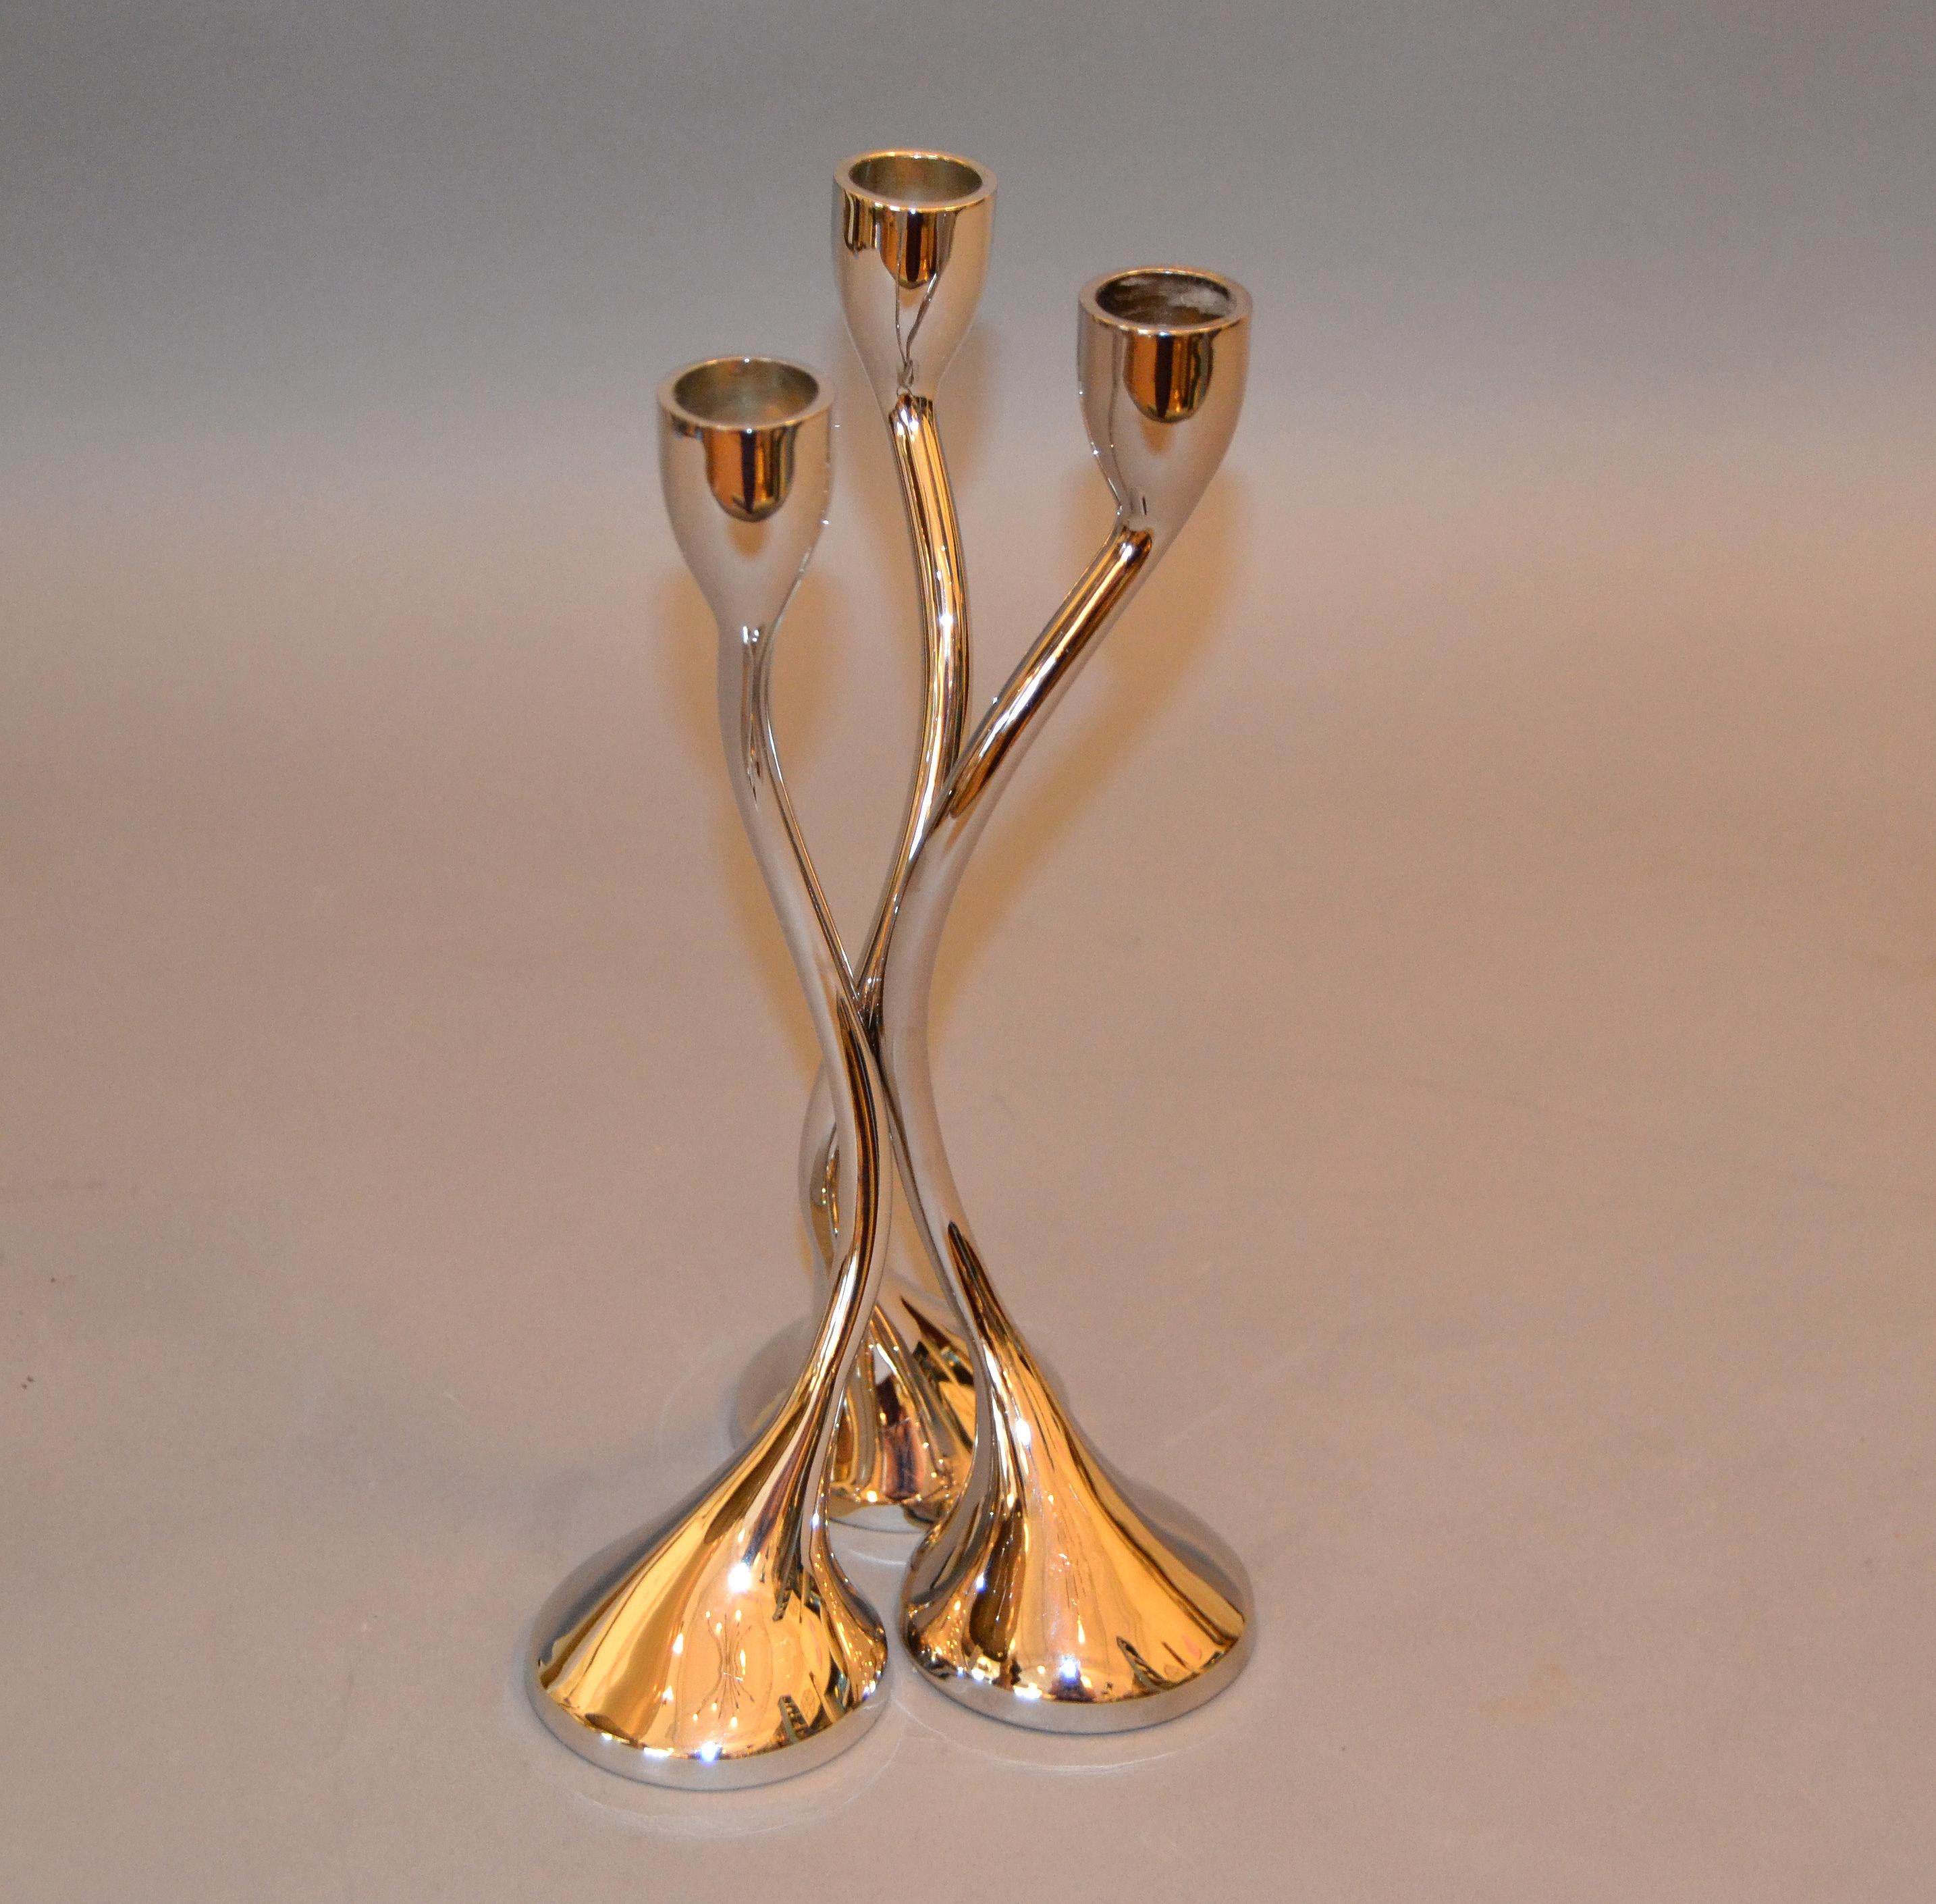 3 Modern Silver Chrome Taper Candlestick Holders Intertwined 3